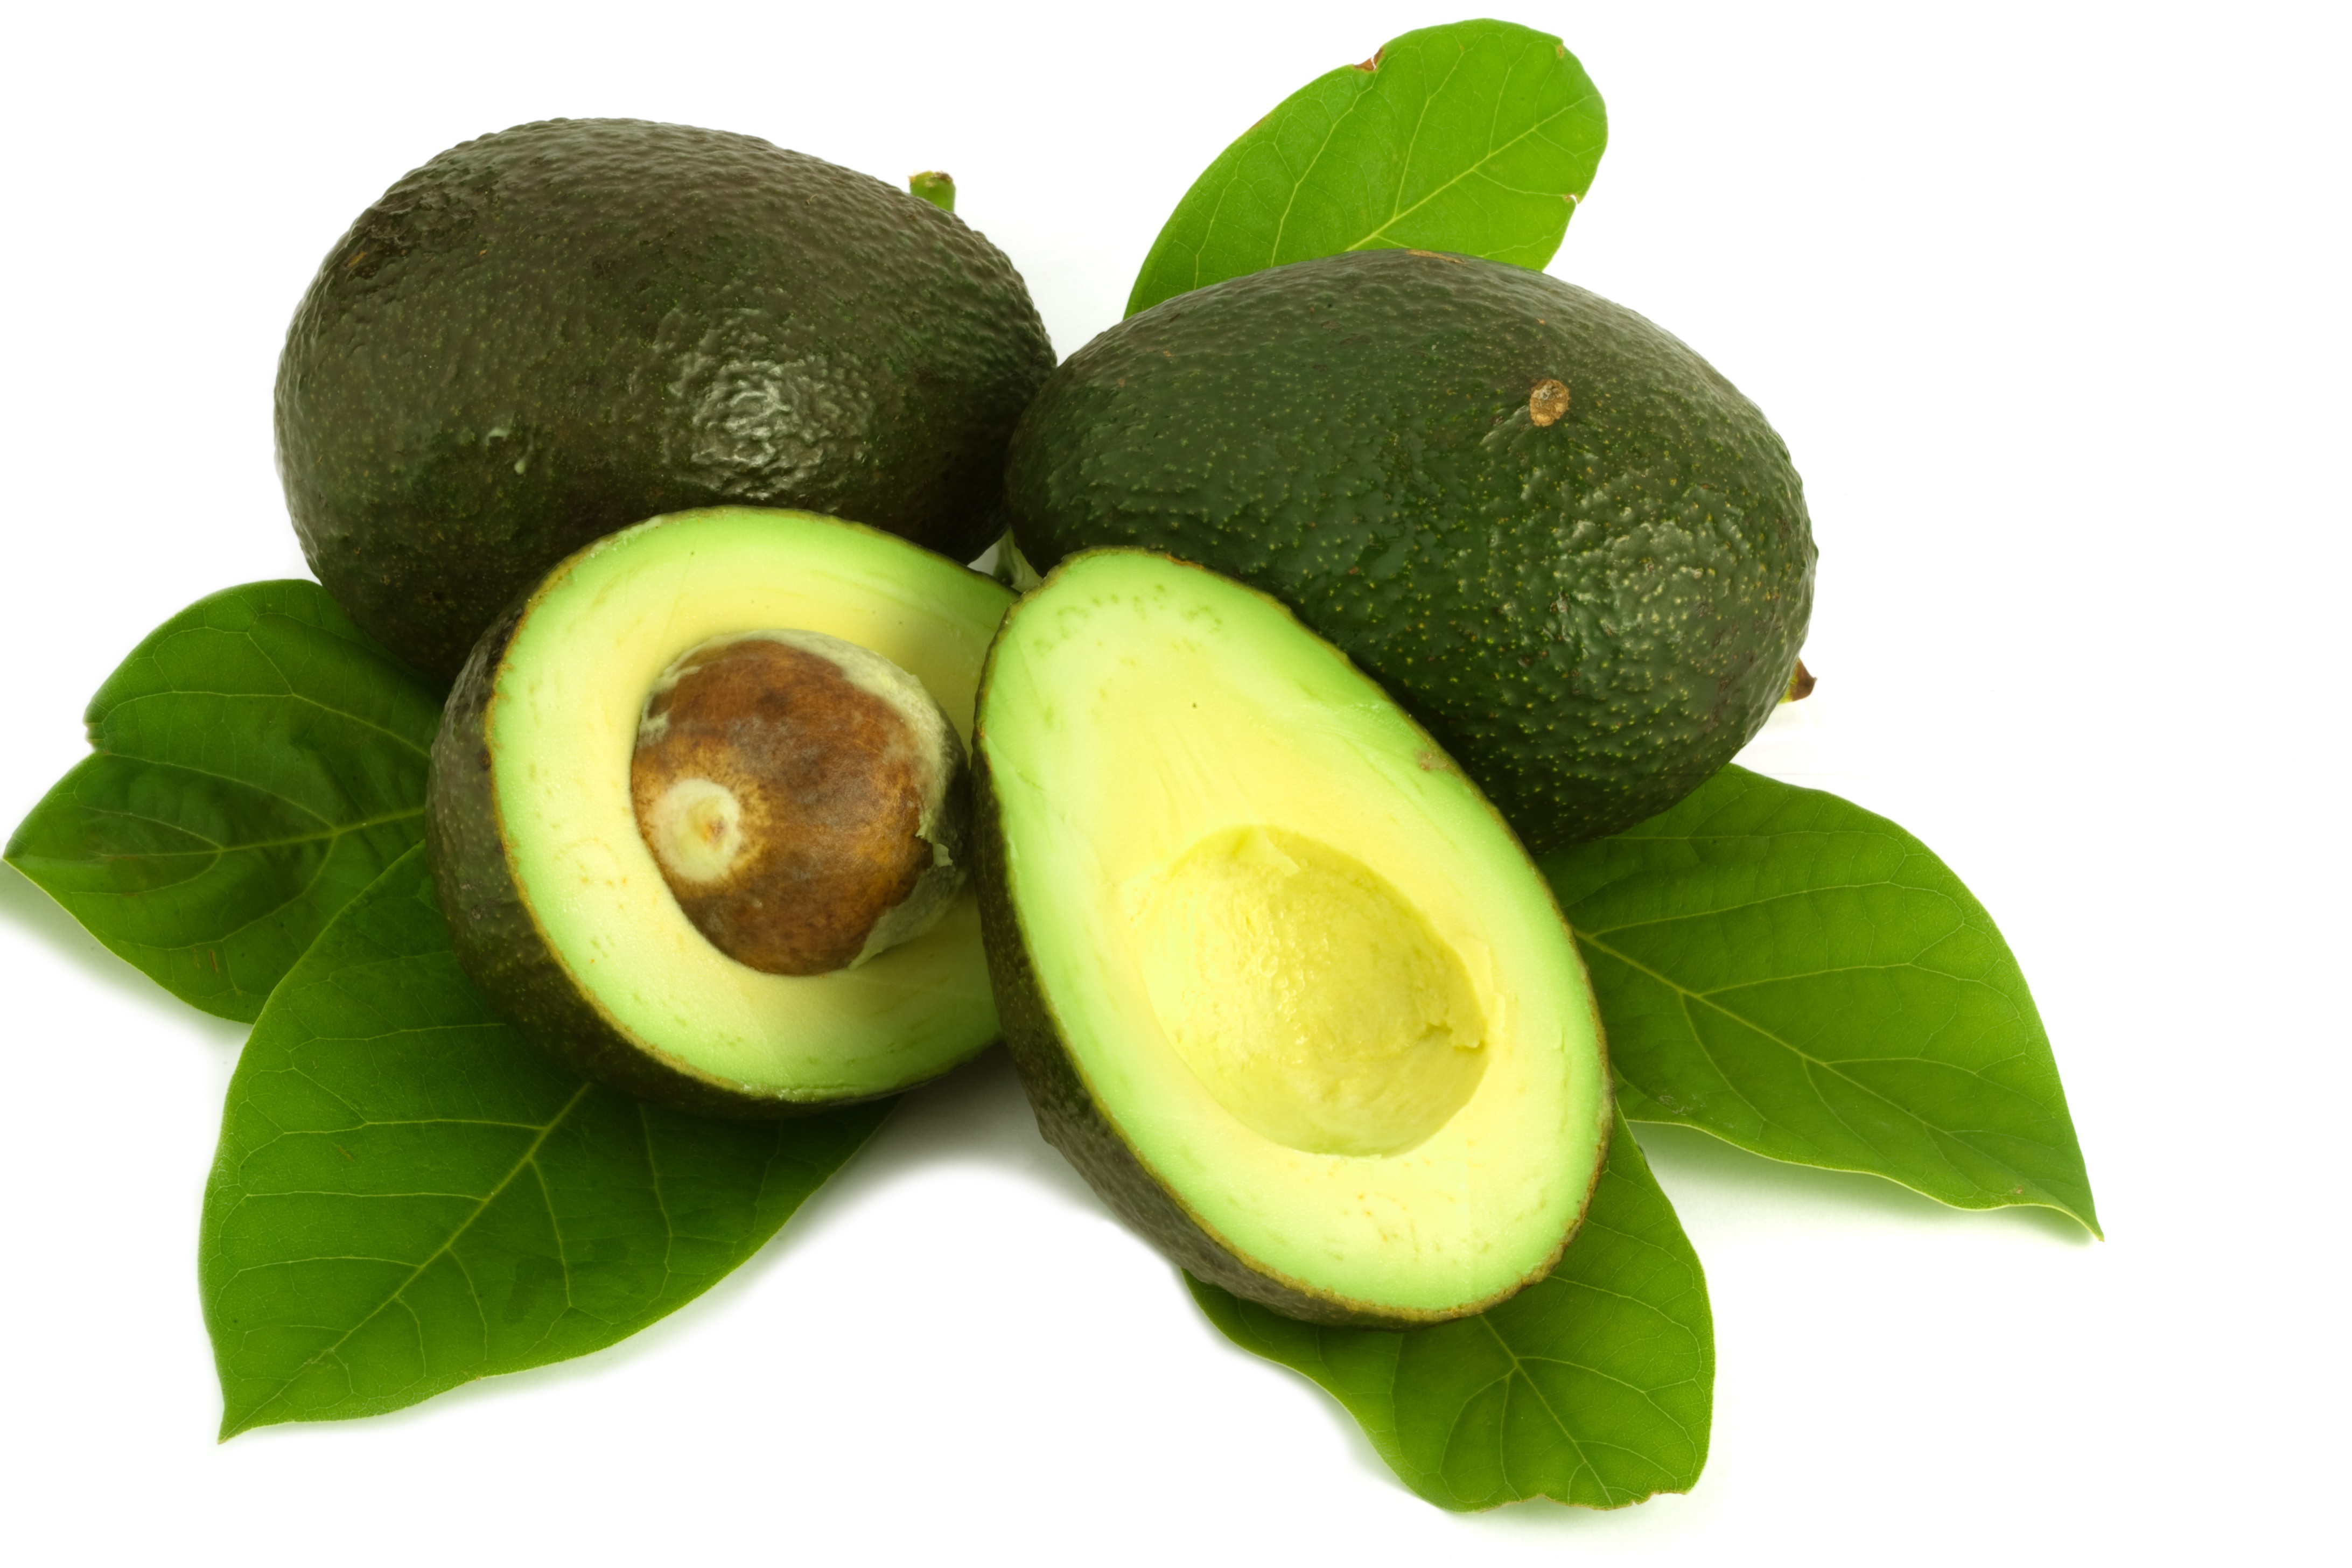 avocados are a nutrient rich snack